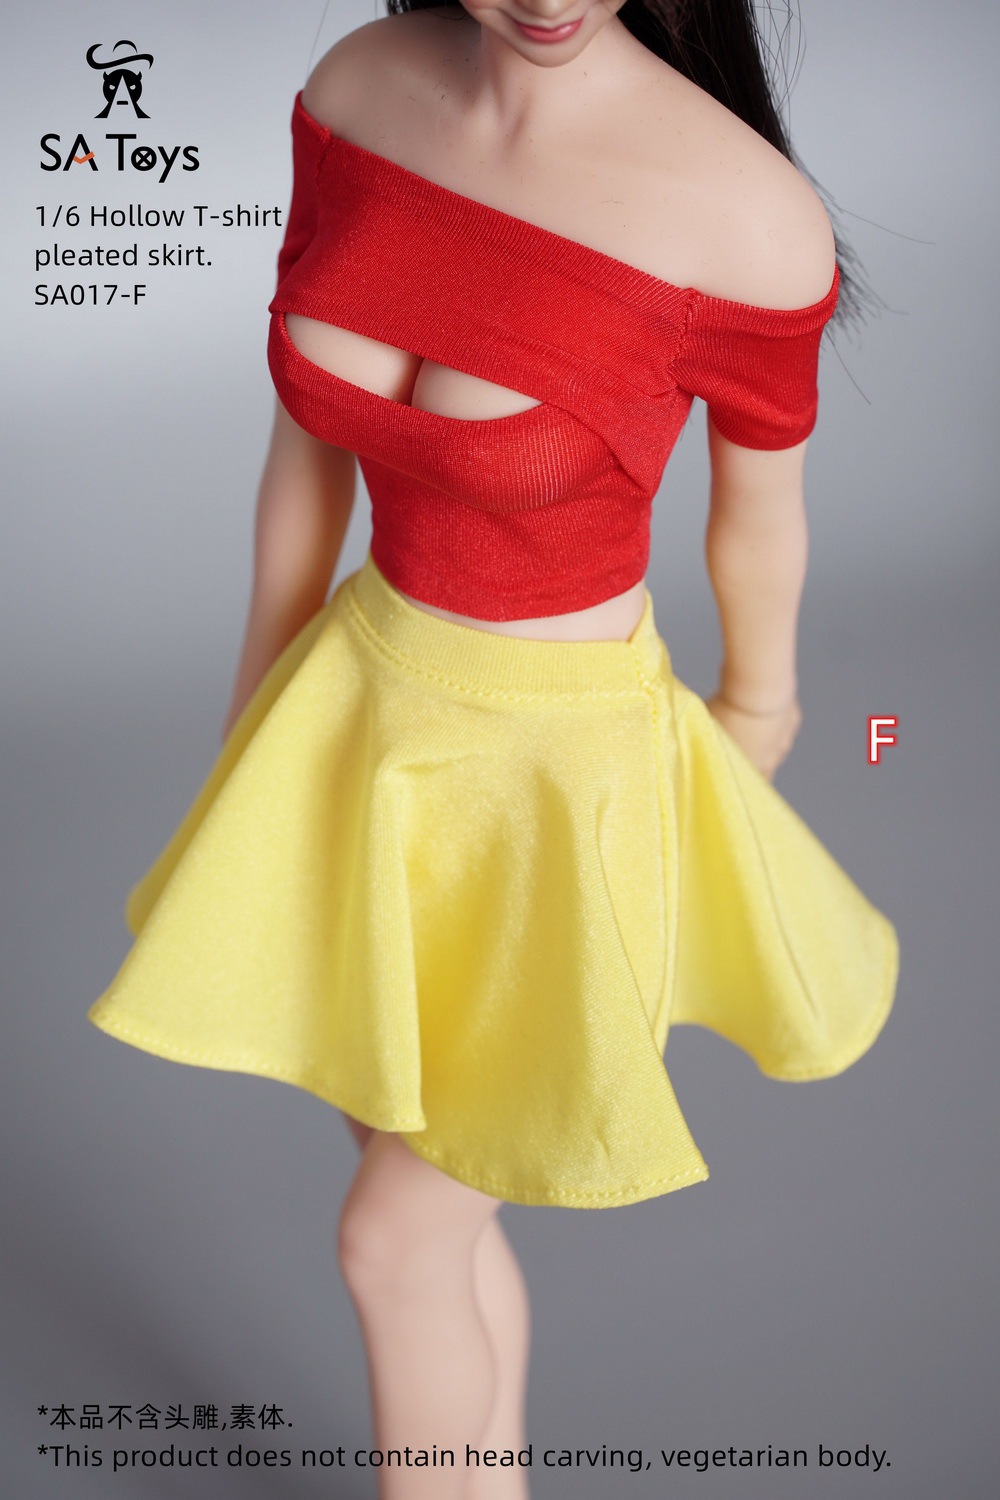 SAToys - NEW PRODUCT: SA Toys: 1/6 Personalized Poster Style Tight Dress/ Hollow T-shirt Pleated Skirt/Side Zipper Tight Skirt [Various styles available]  16560610